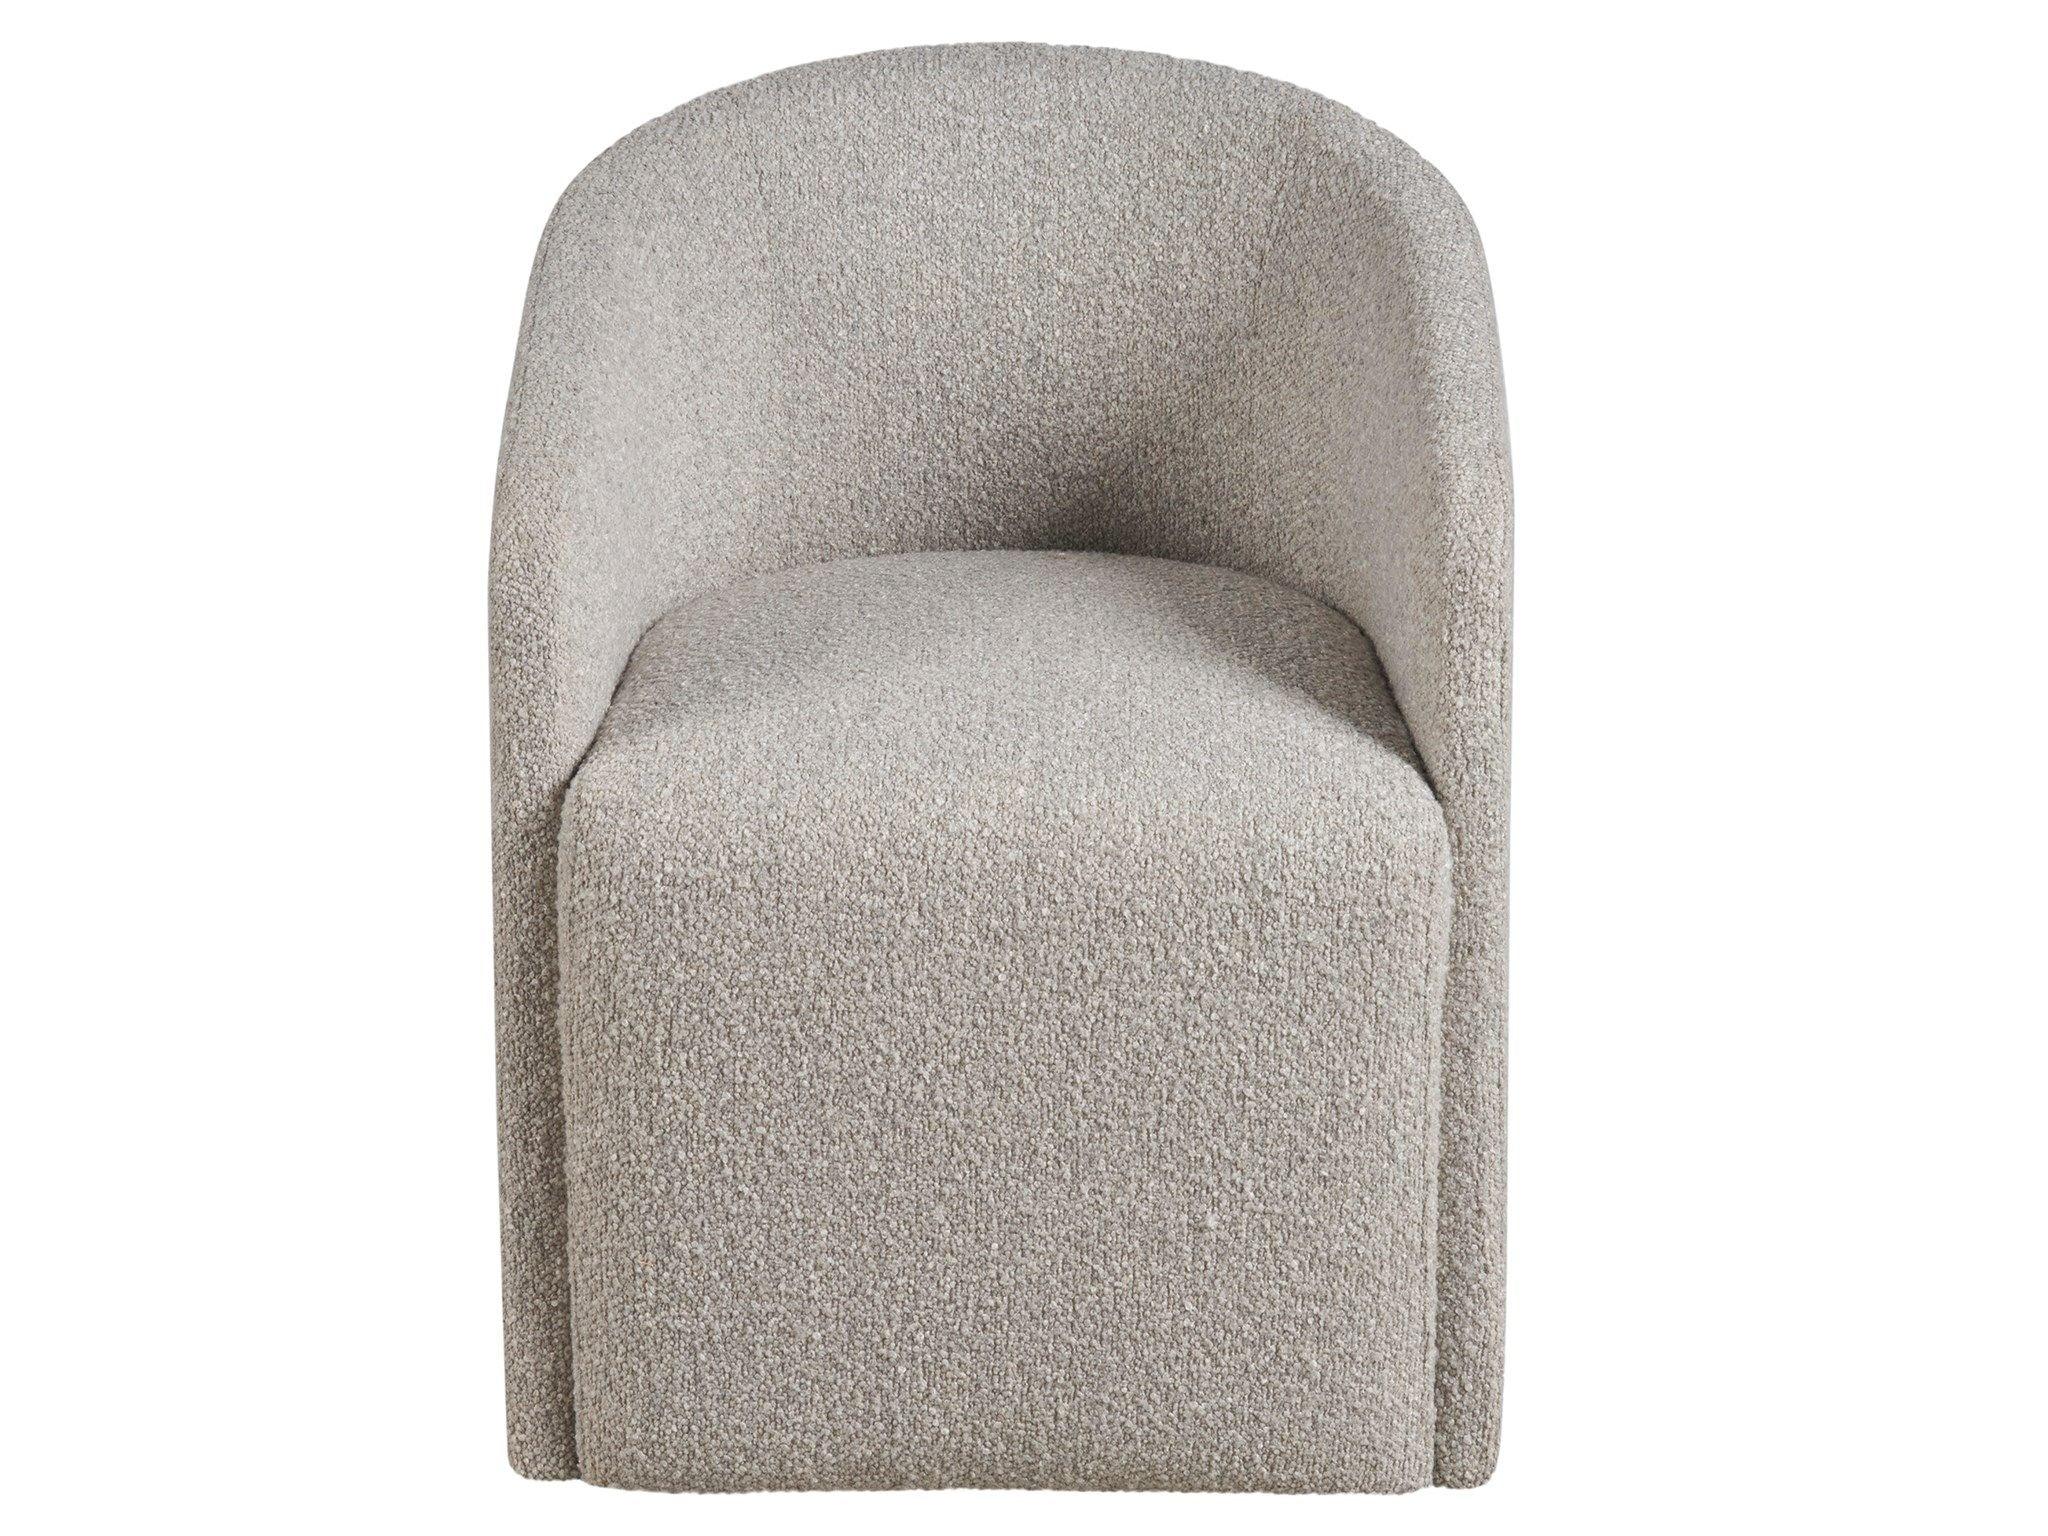 Universal Furniture - New Modern - Marlow Dining Chair - Gray - 5th Avenue Furniture